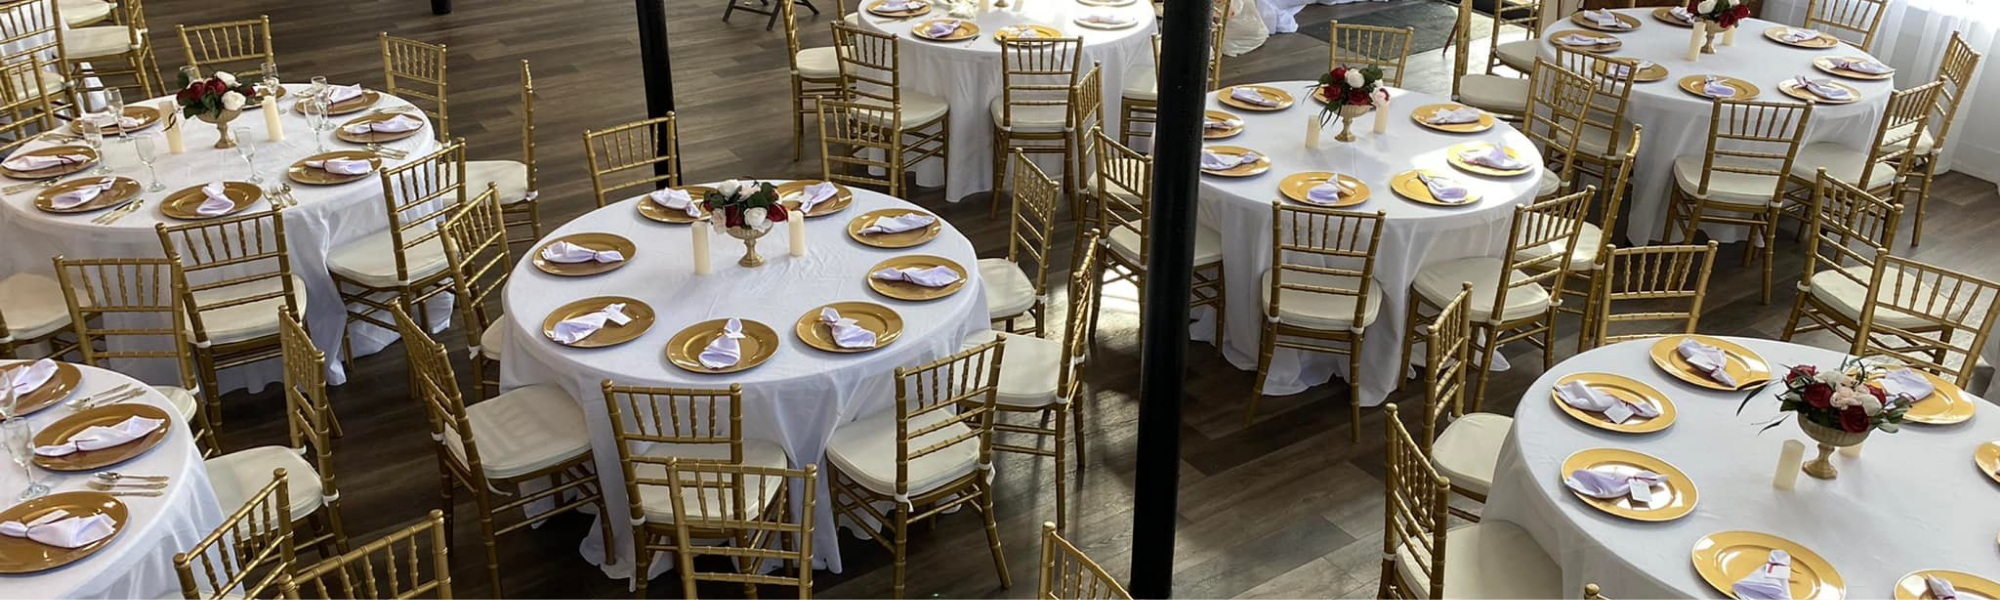 beautiful reception tables with gold chairs and plates